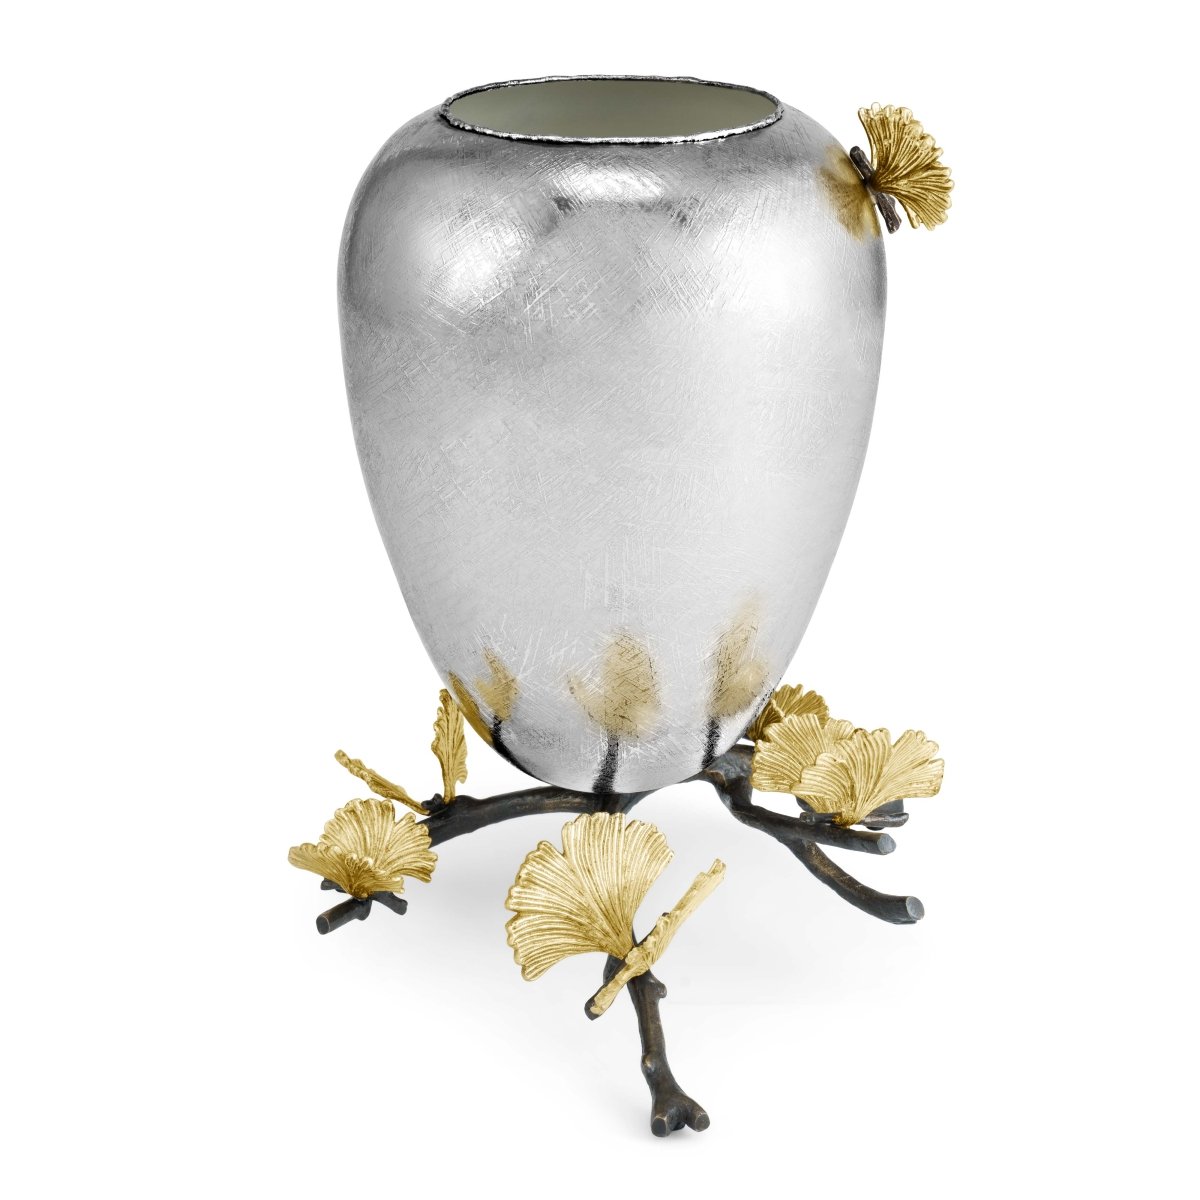 Michael Aram Butterfly Ginkgo Footed Vase